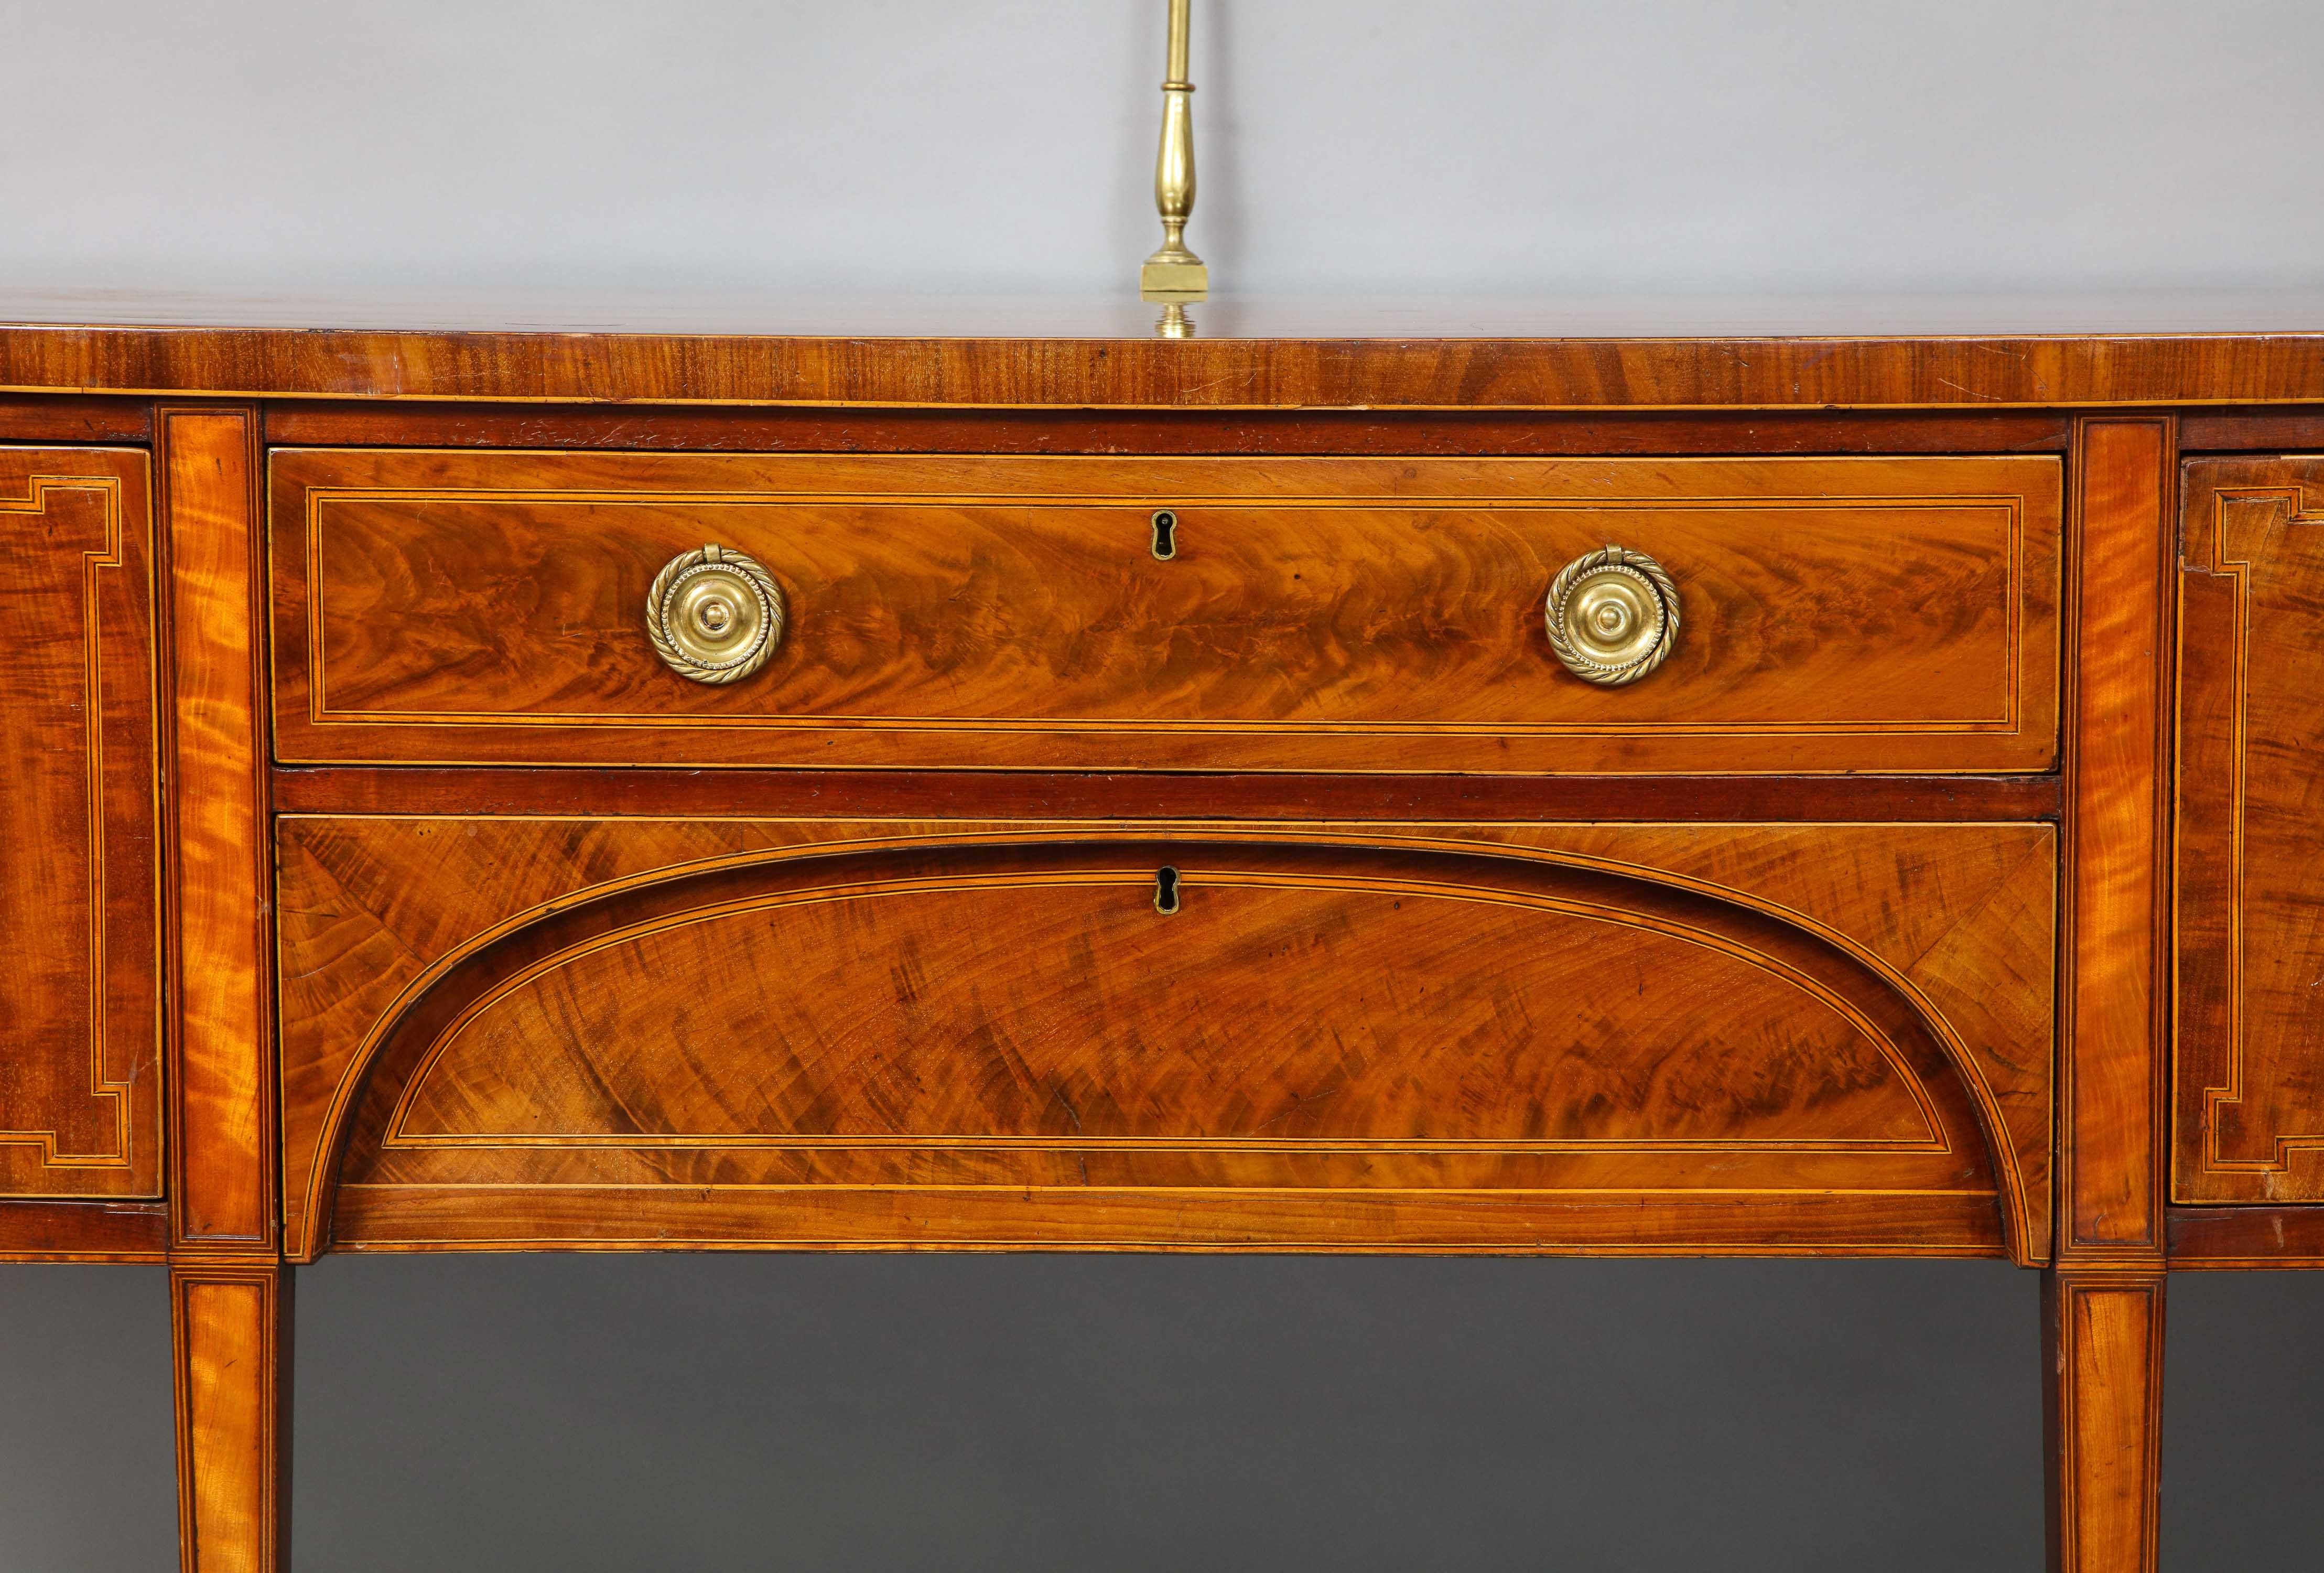 Very fine Georgian mahogany and satinwood stepped bow front sideboard, the richly figured top retaining original brass gallery and with ebony and holly string inlay over two deep and shallow drawers also strung with ebony and holly, and standing on